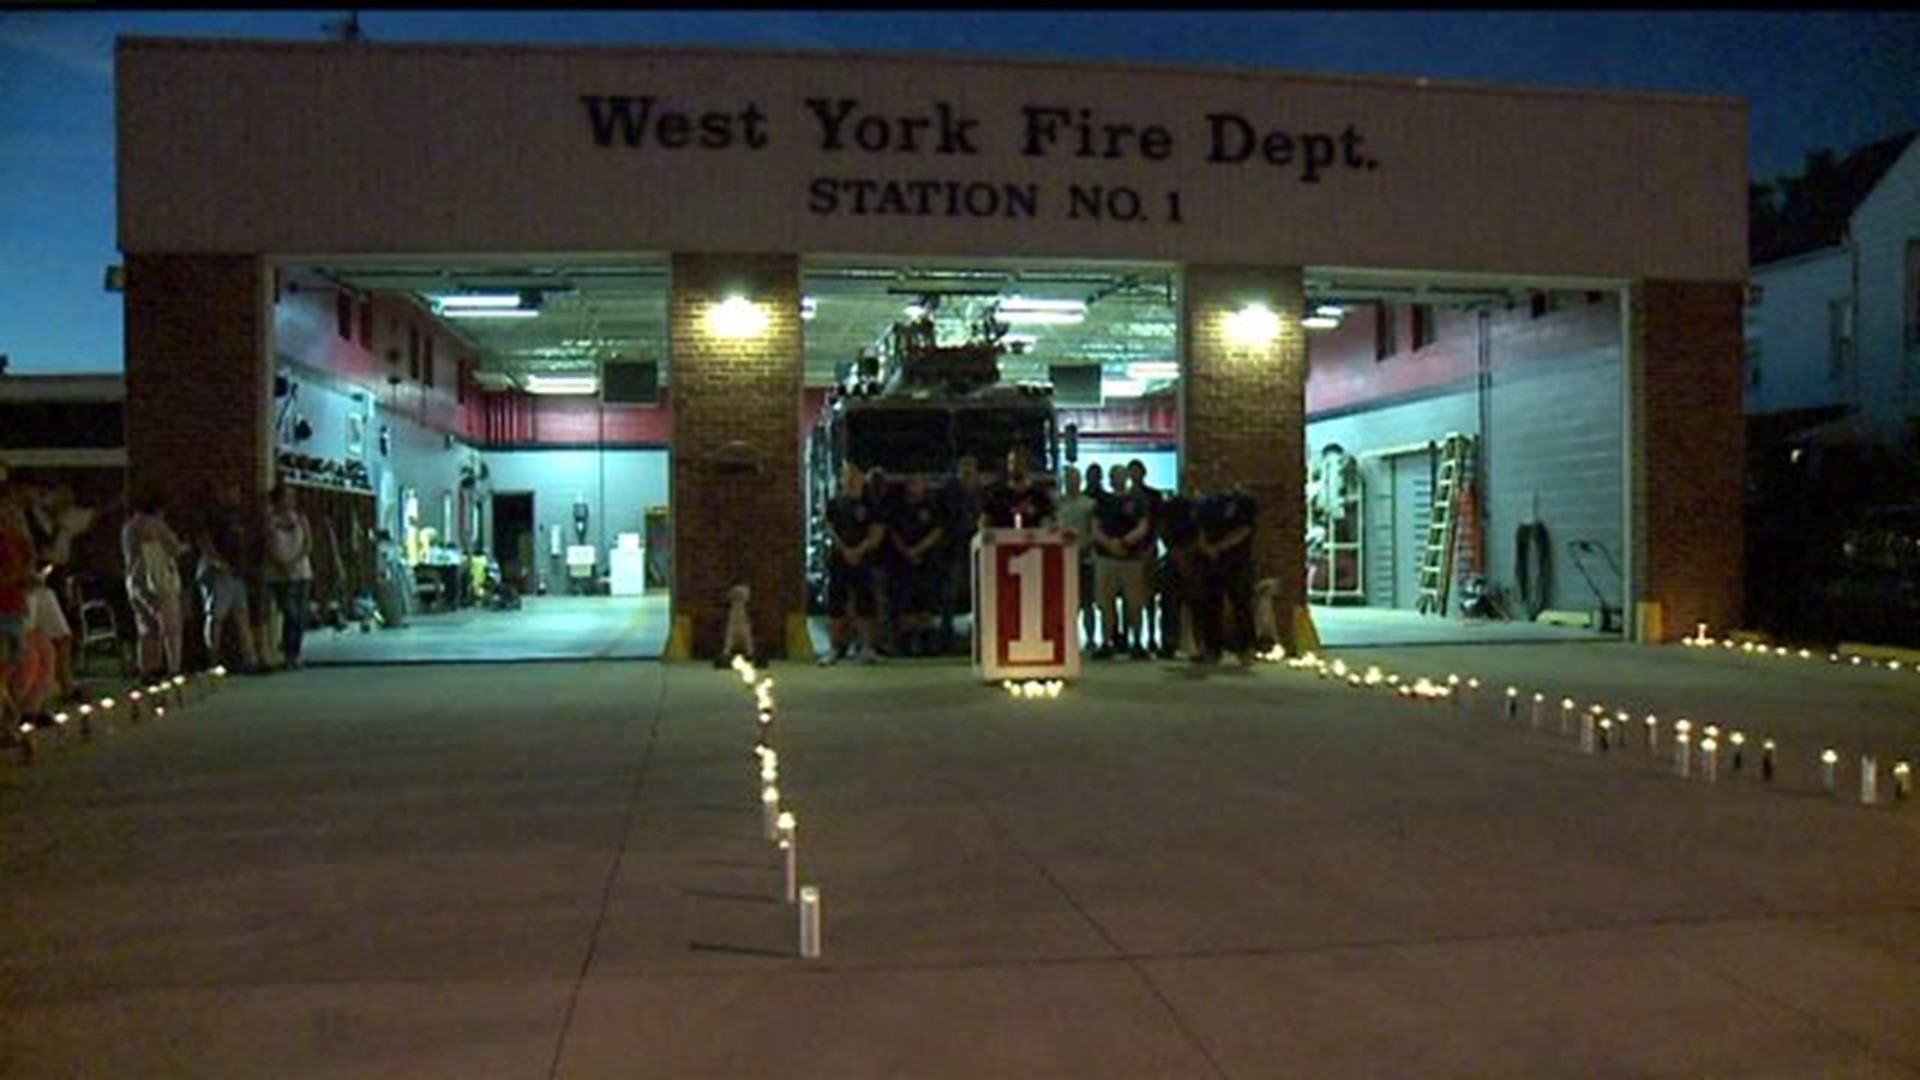 West York holds candlelight vigil in honor of 9/11 victims